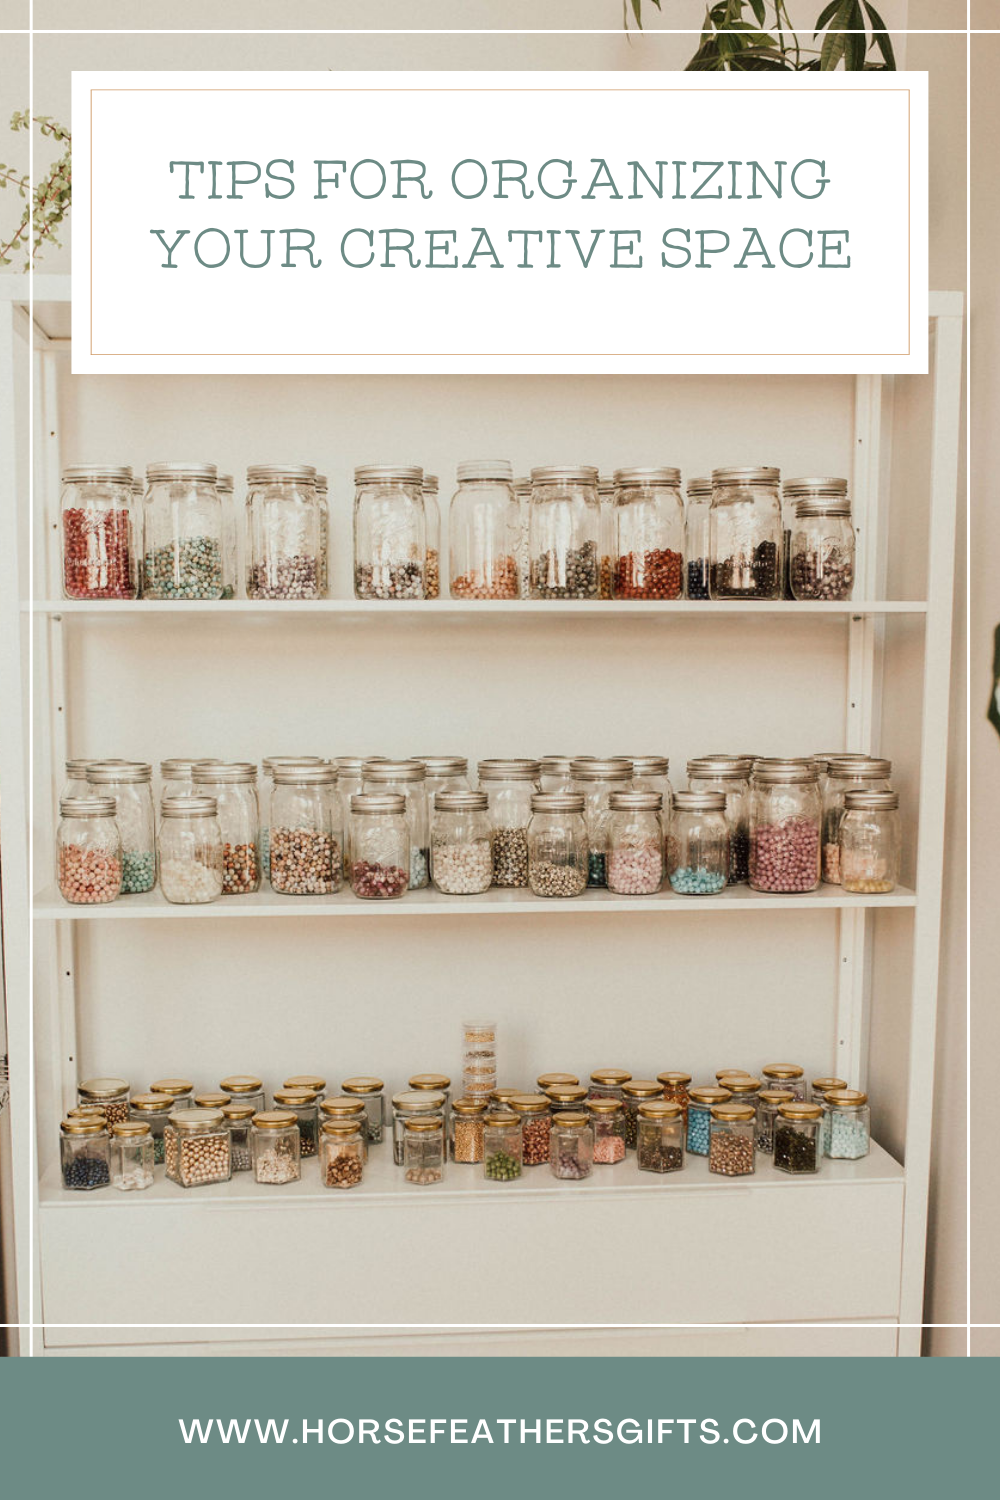 Tips for Organizing Your Creative Space